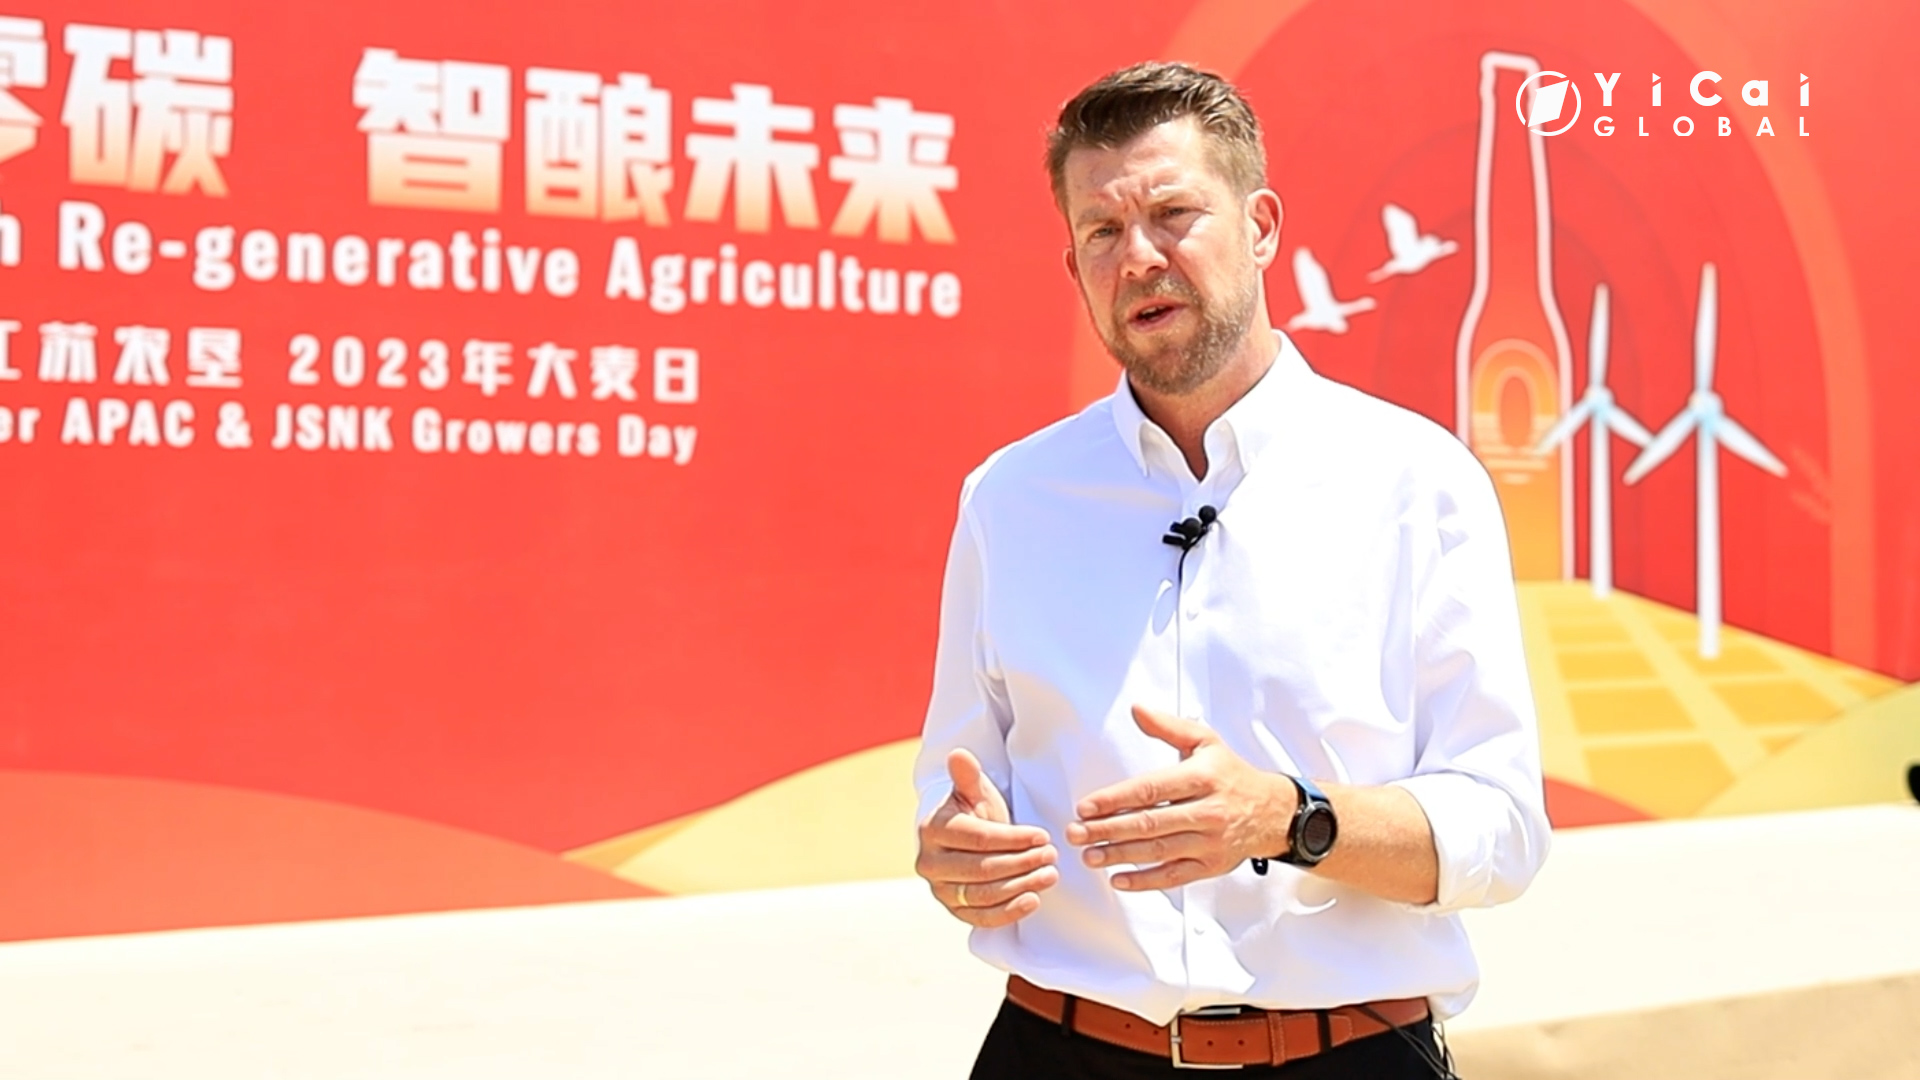 Localizing Barley Growing Ensures High Quality, Secure Supply in China, Budweiser APAC VP Says